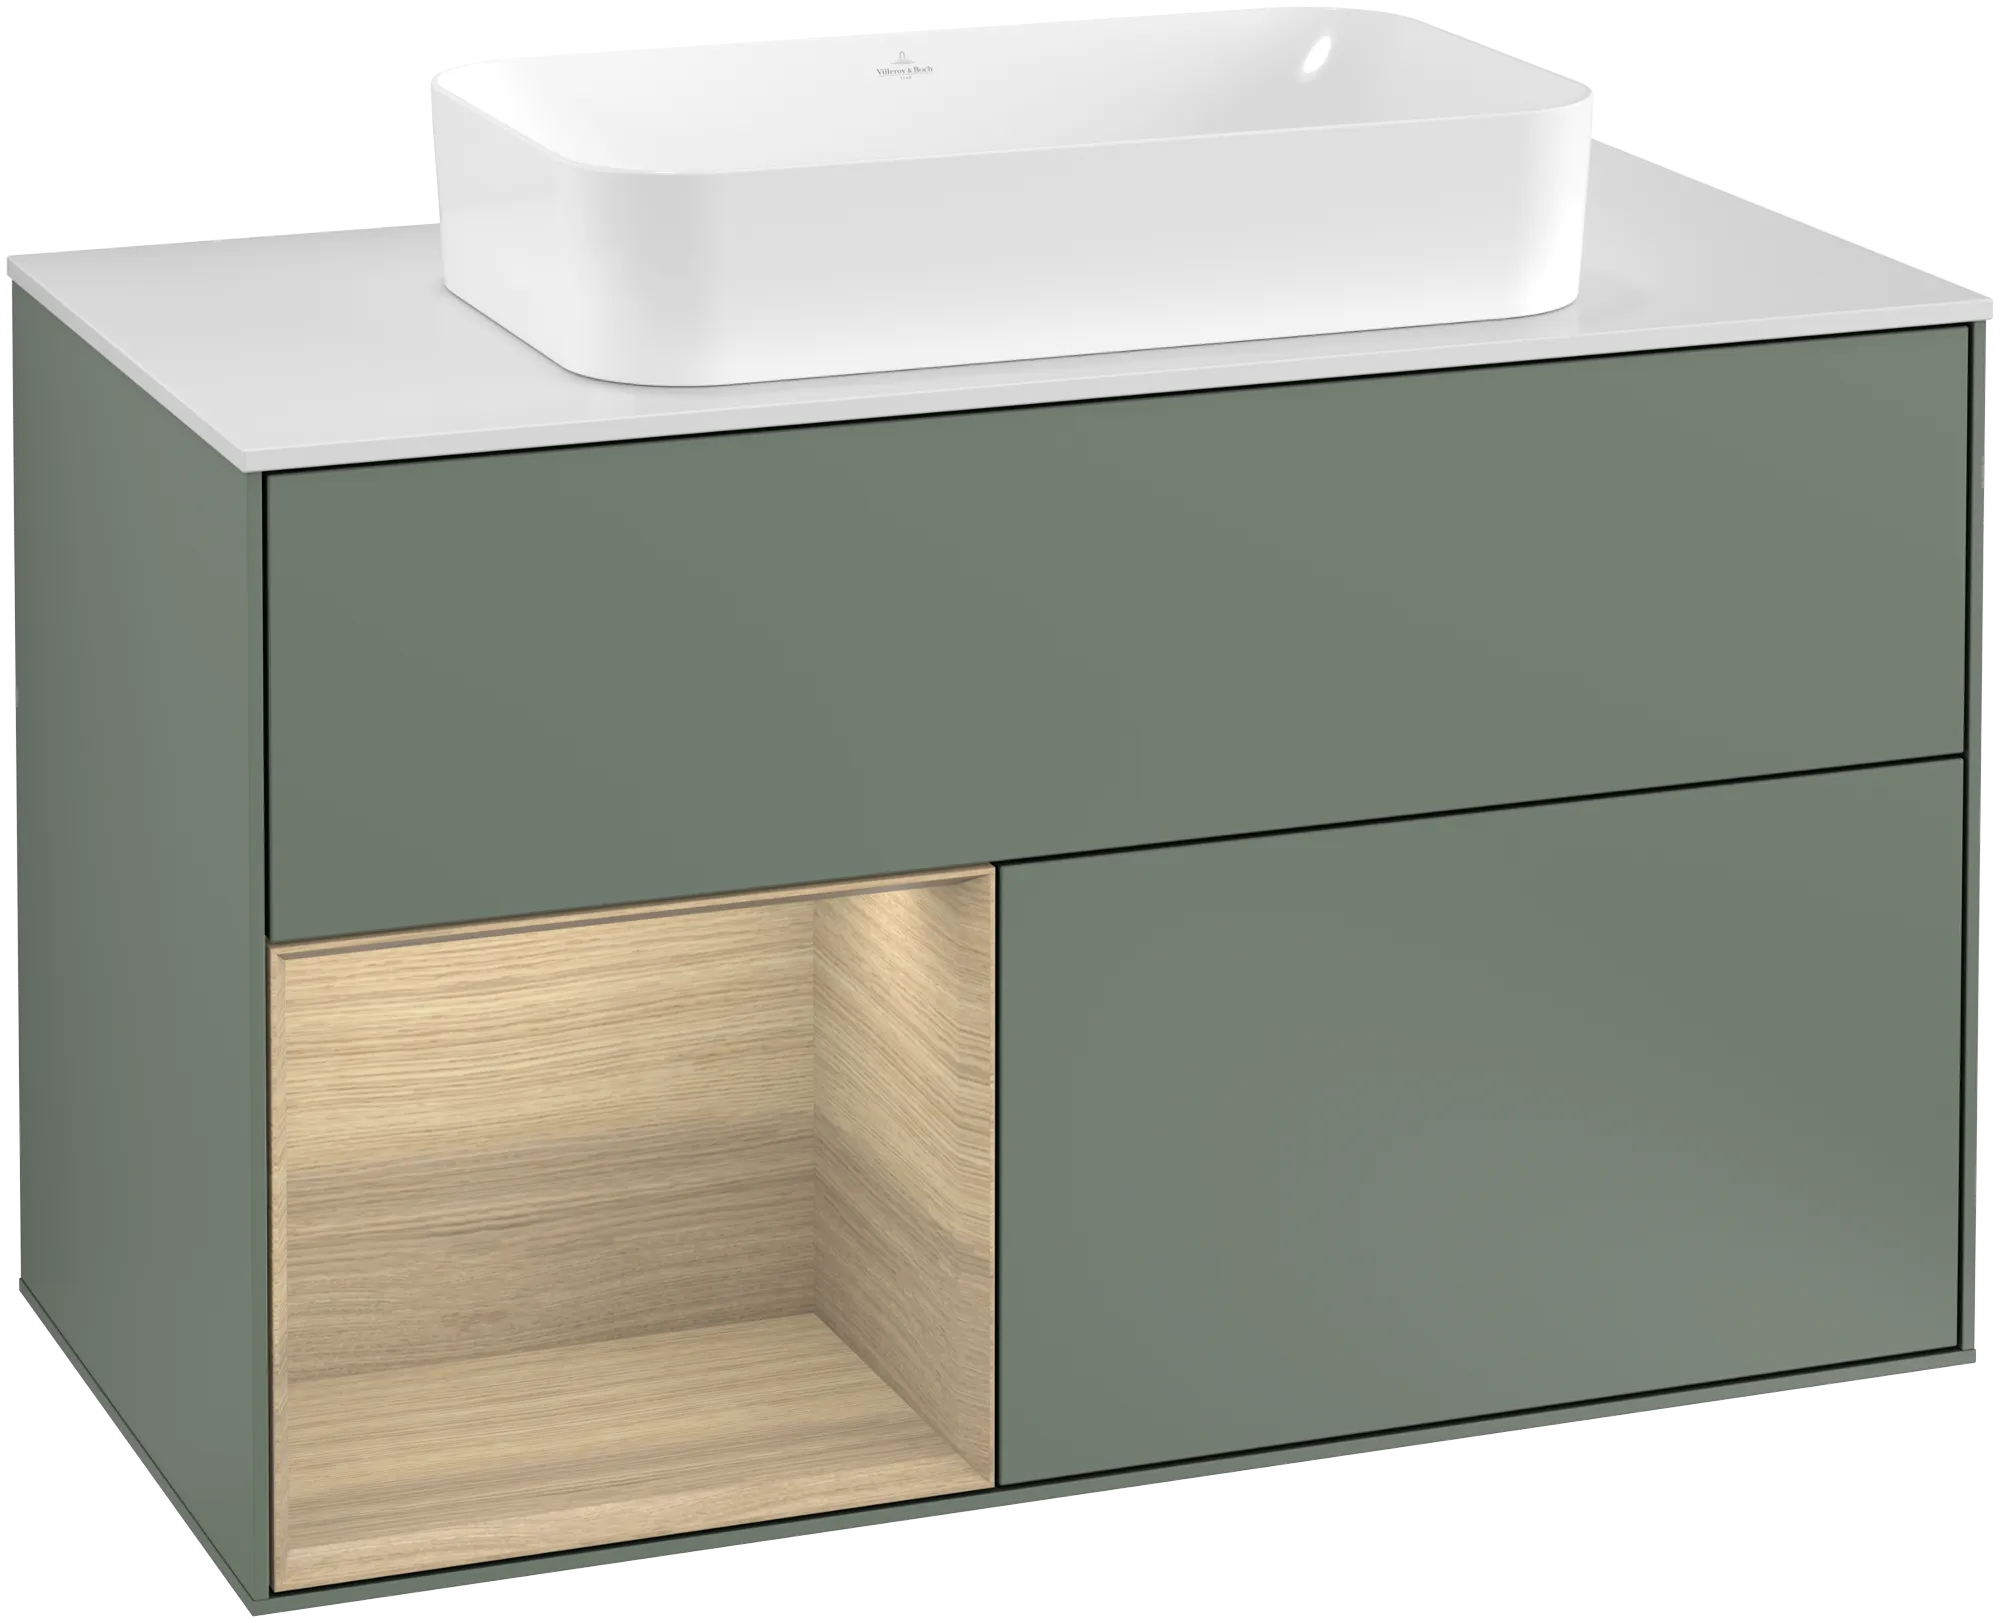 Picture of VILLEROY BOCH Finion Vanity unit, with lighting, 2 pull-out compartments, 1000 x 603 x 501 mm, Olive Matt Lacquer / Oak Veneer / Glass White Matt #G241PCGM